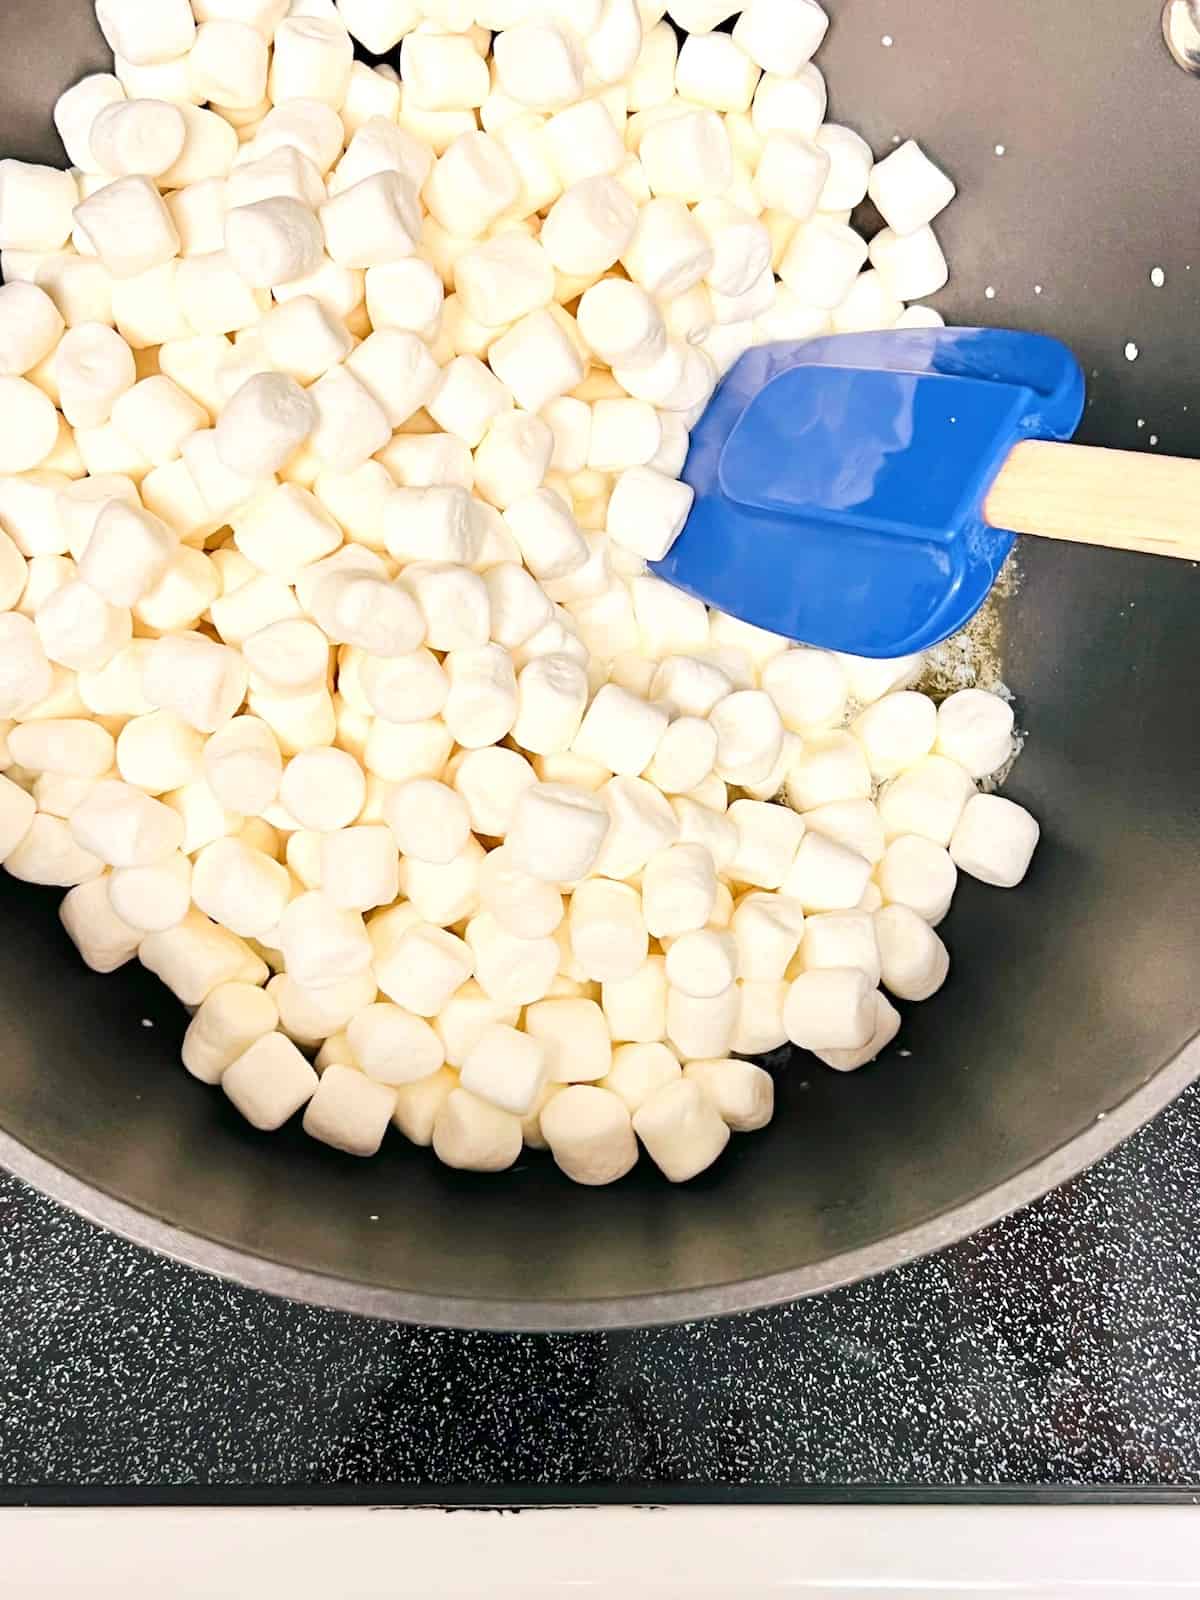 Melt the butter and mini marshmallows in a pot on the stove.